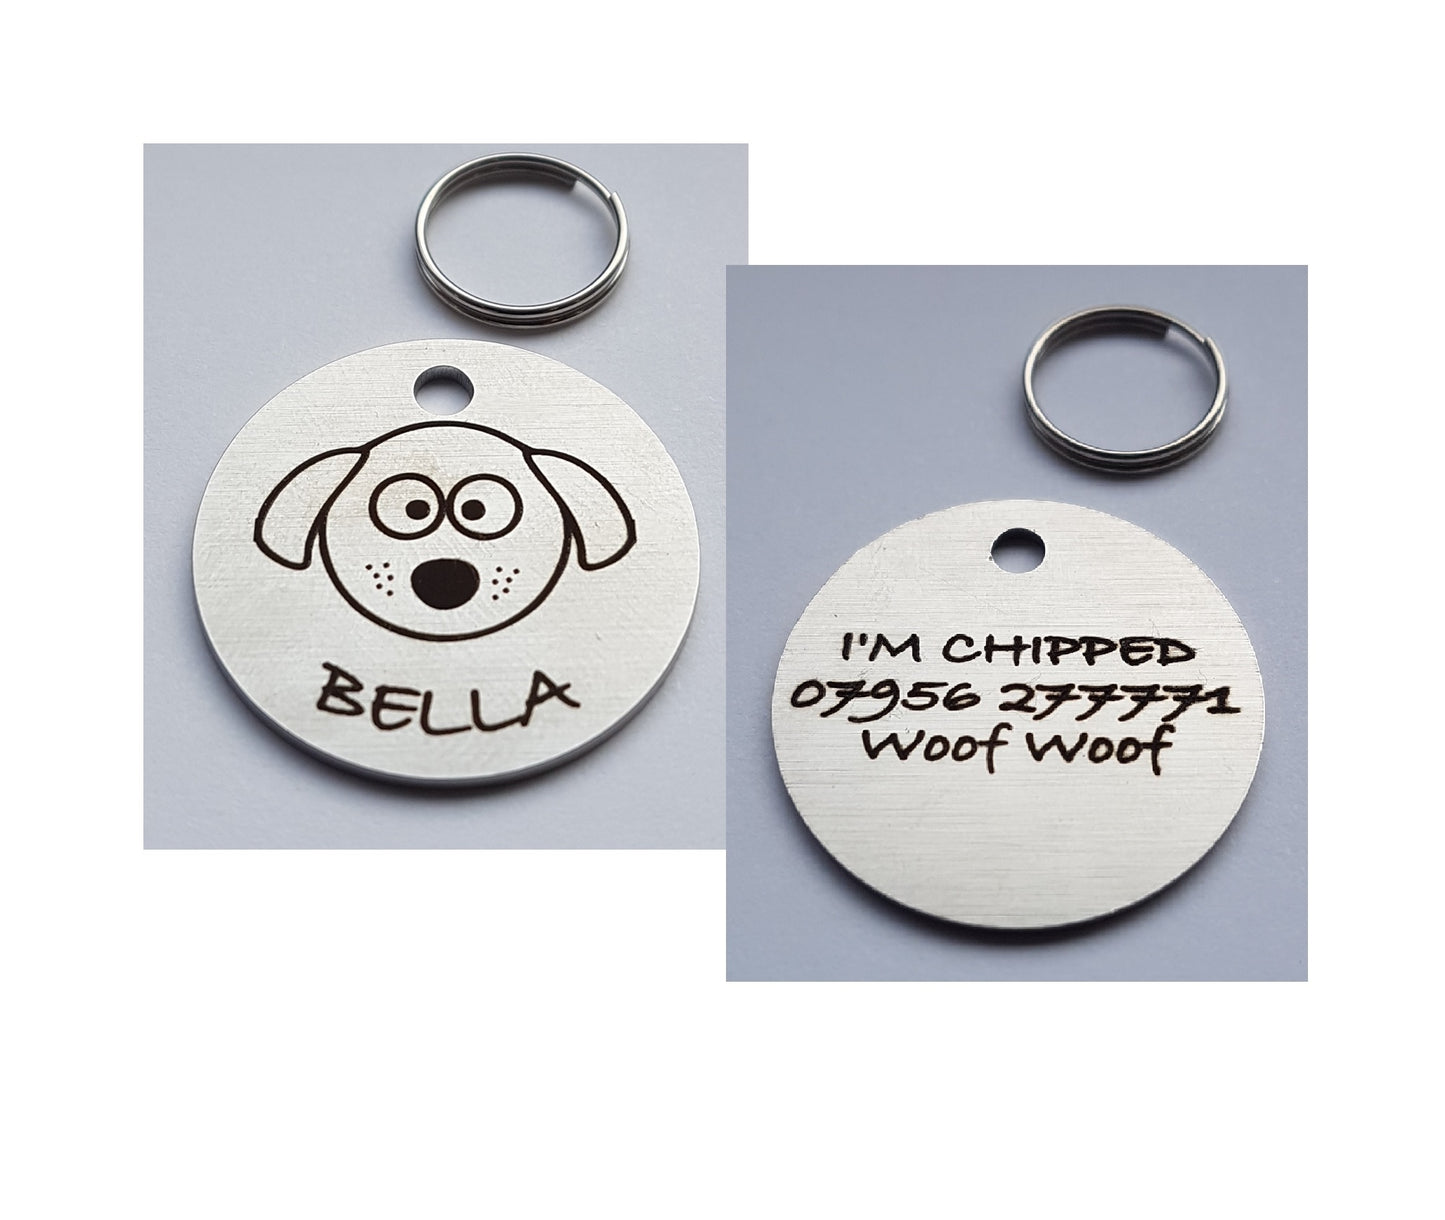 30mm Engraved Stainless Steel "Goofy" Dog Tag / ID Disc